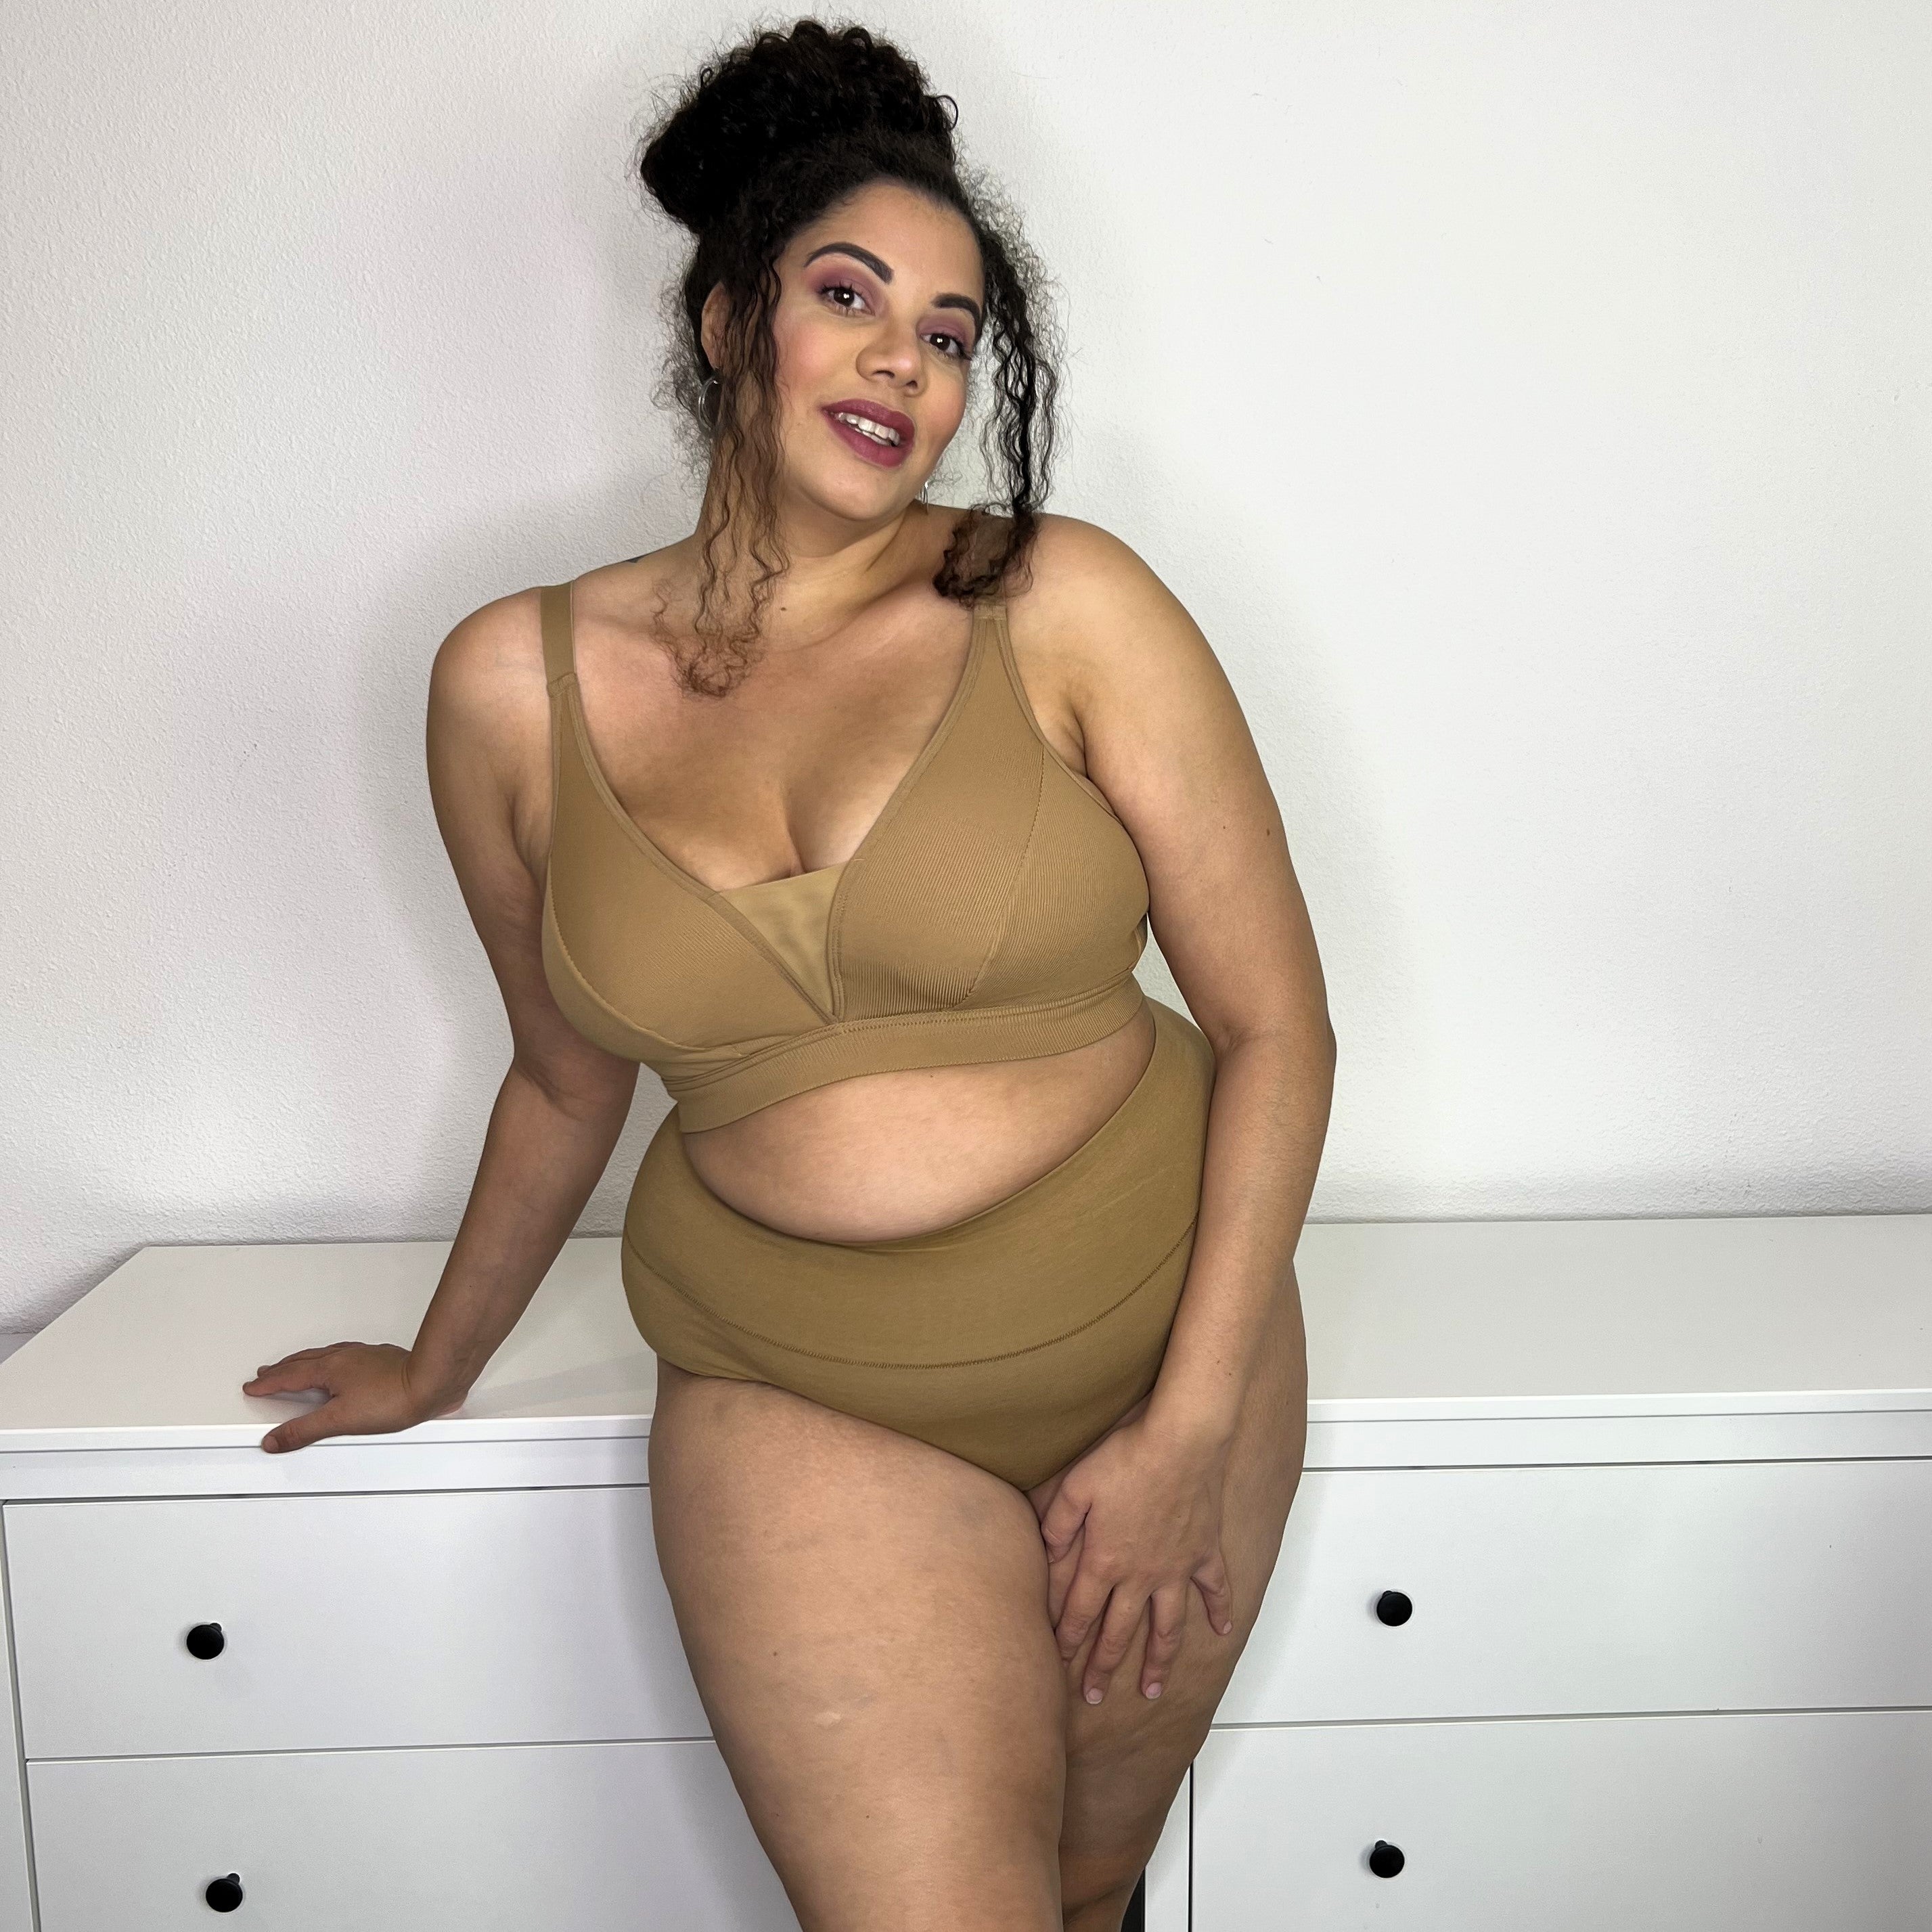 donald laird recommends www caramel bbw com pic